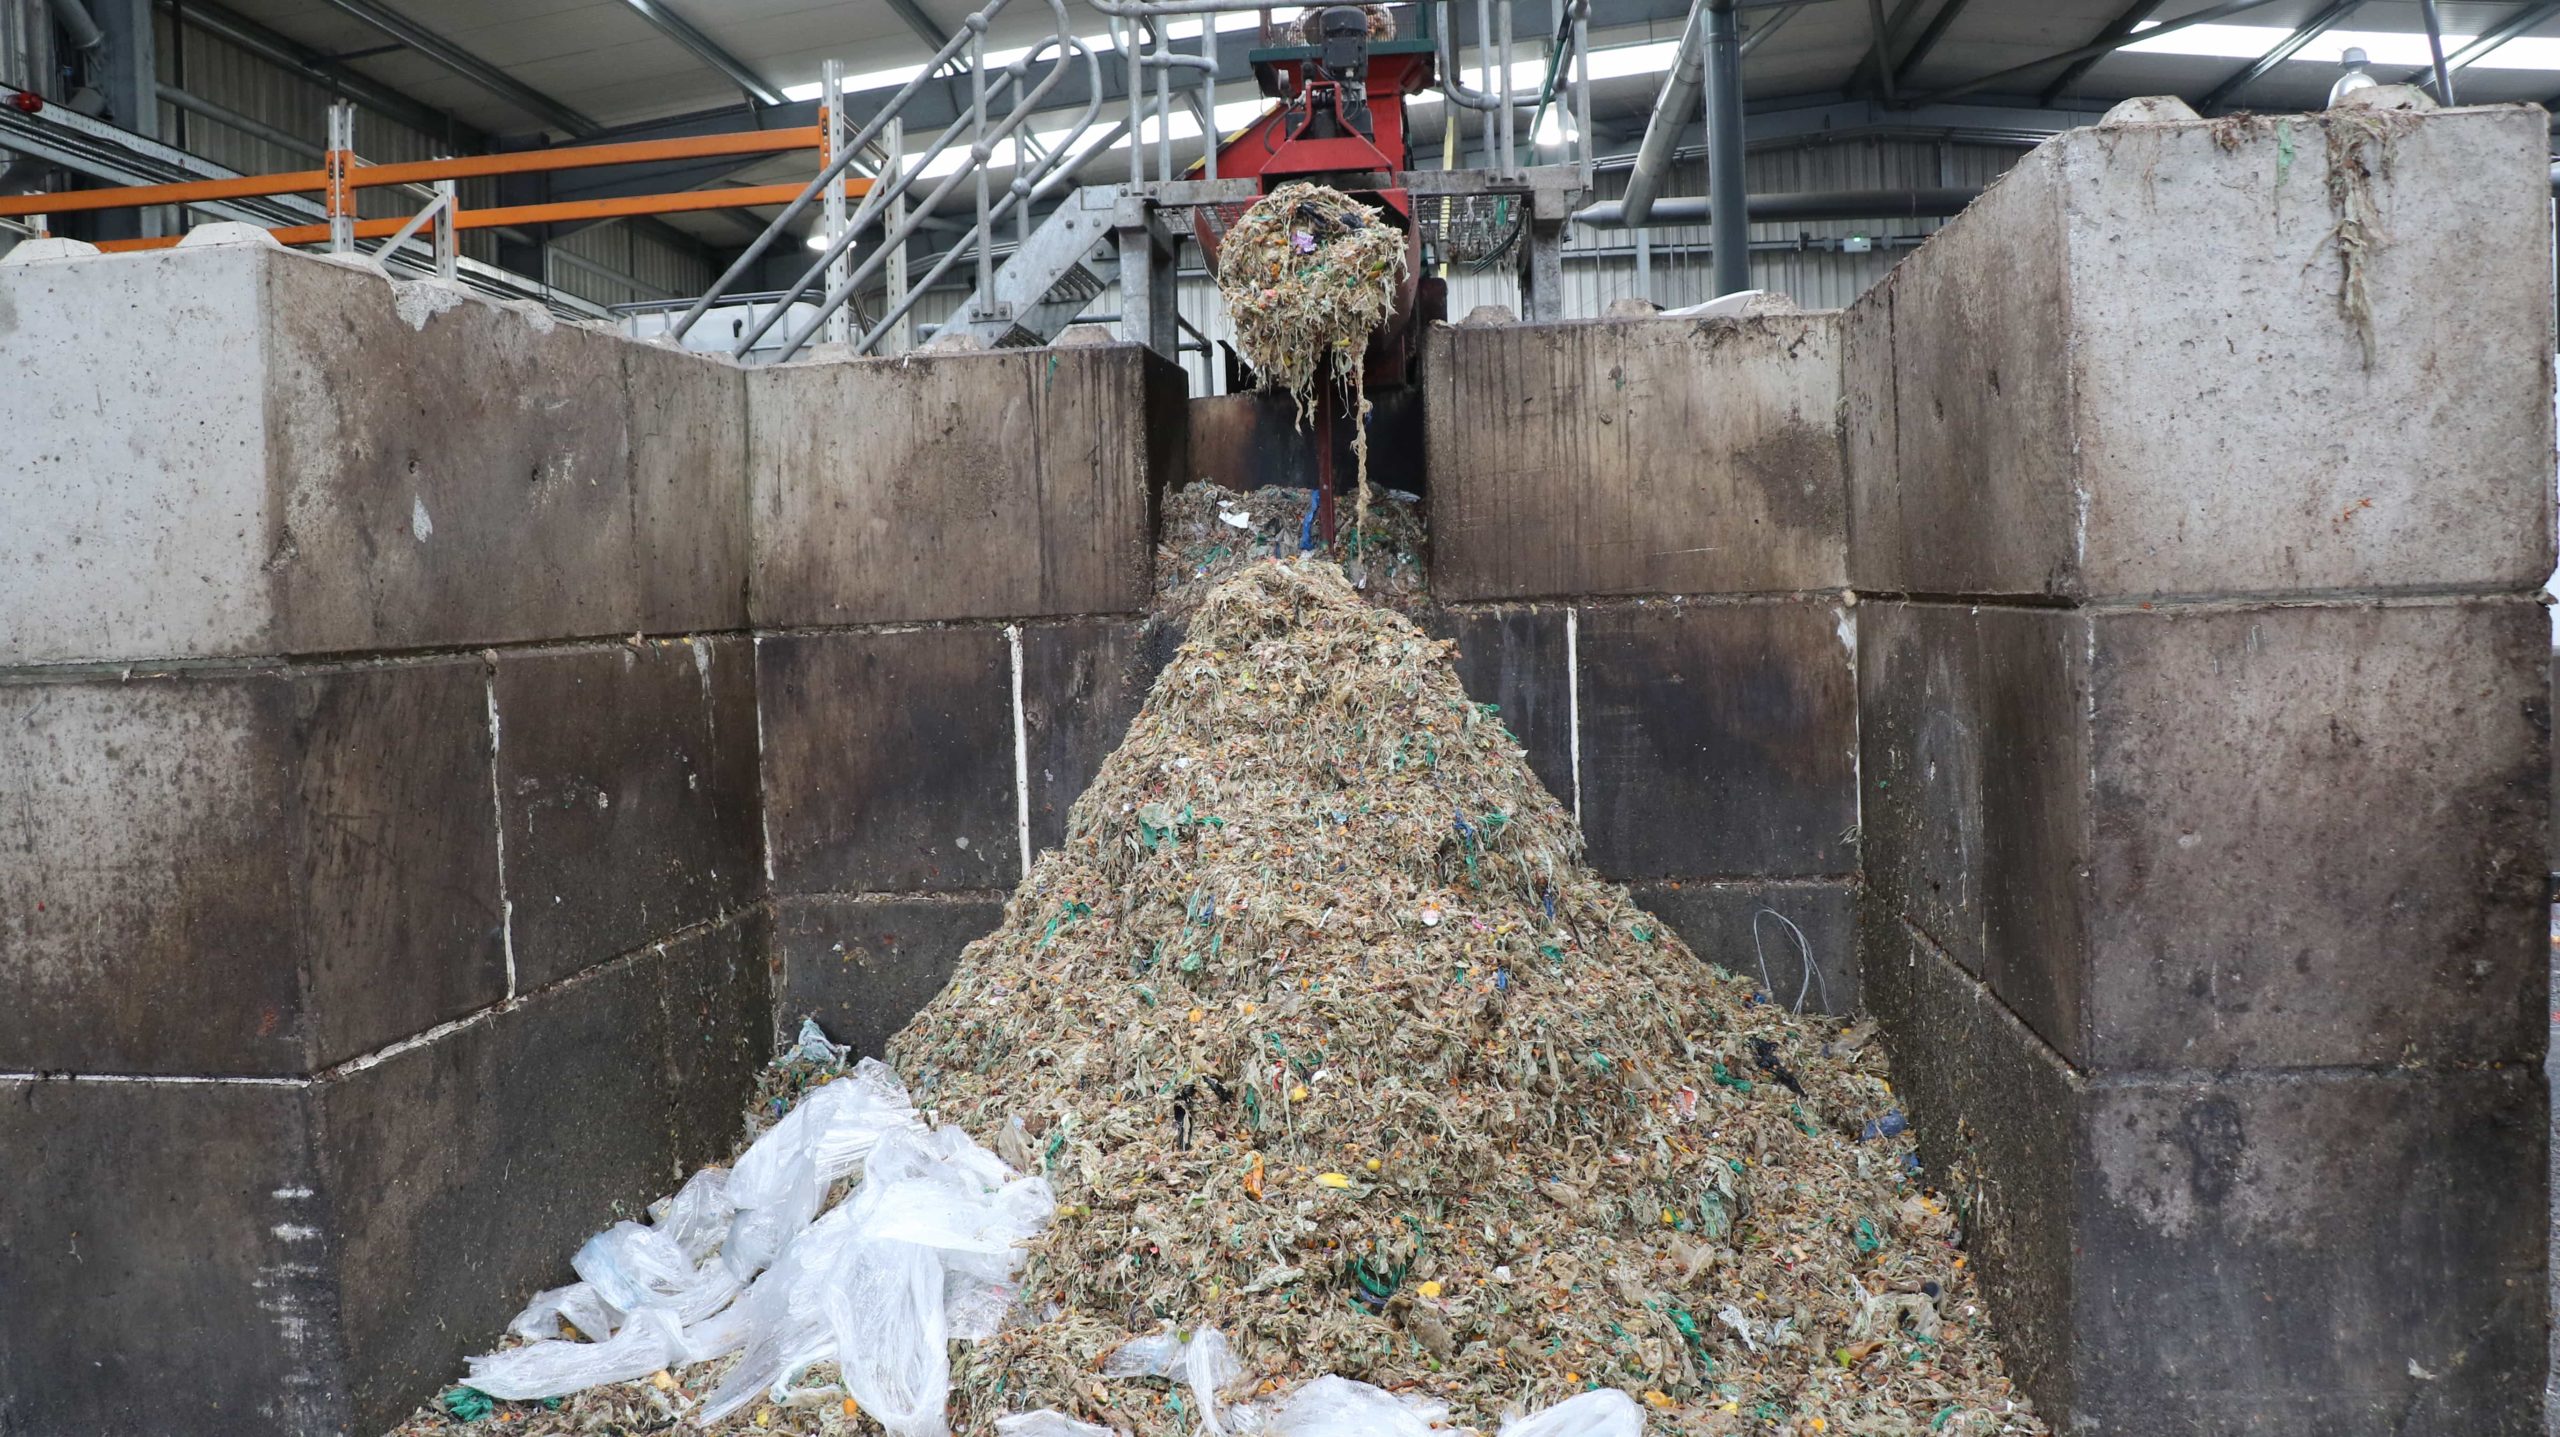 Most AD plants have the technology to process both compostable and traditional plastic material